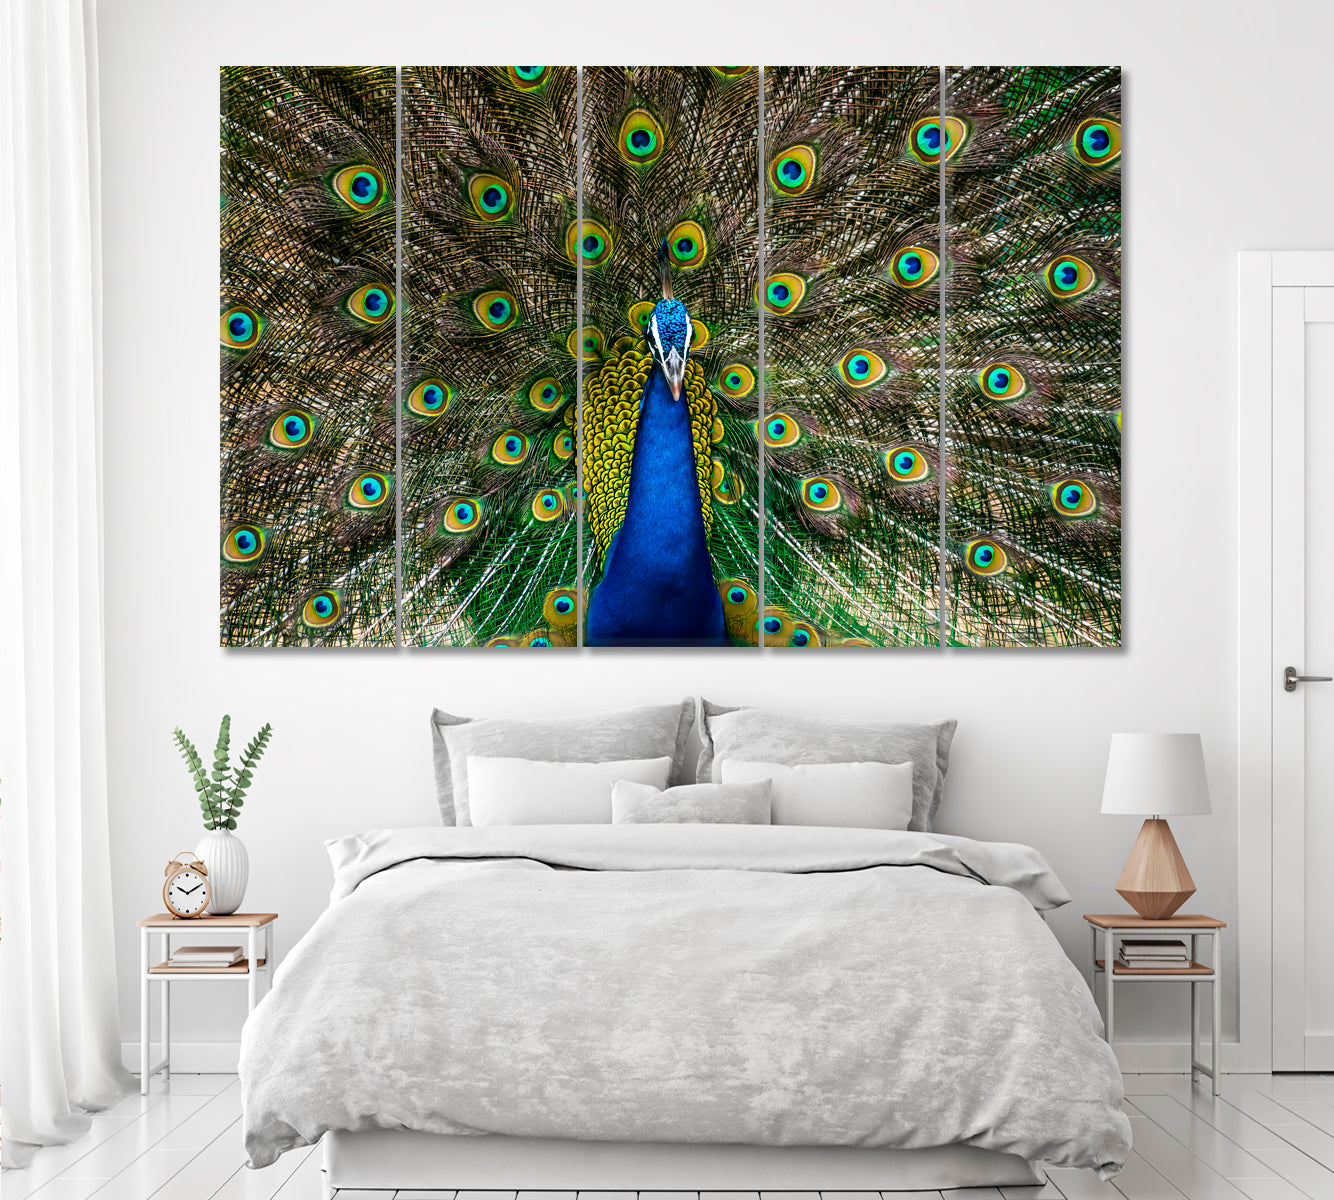 Peacock Showing Bright Feathers Canvas Print ArtLexy 5 Panels 36"x24" inches 